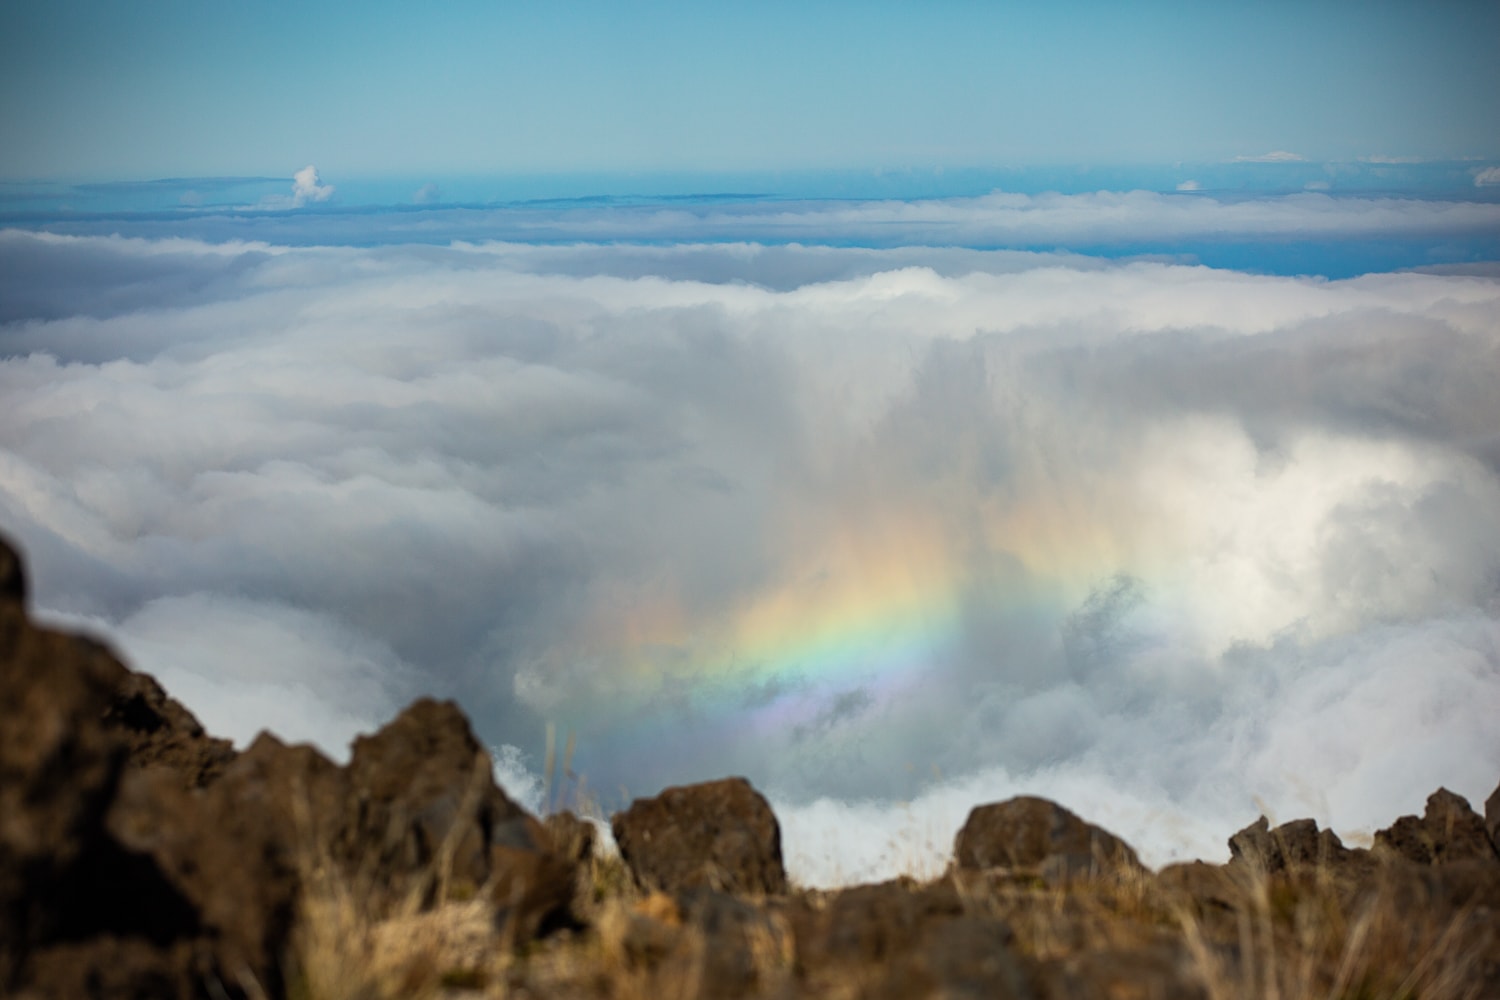 A rainbow above the clouds from Haleakala summit.